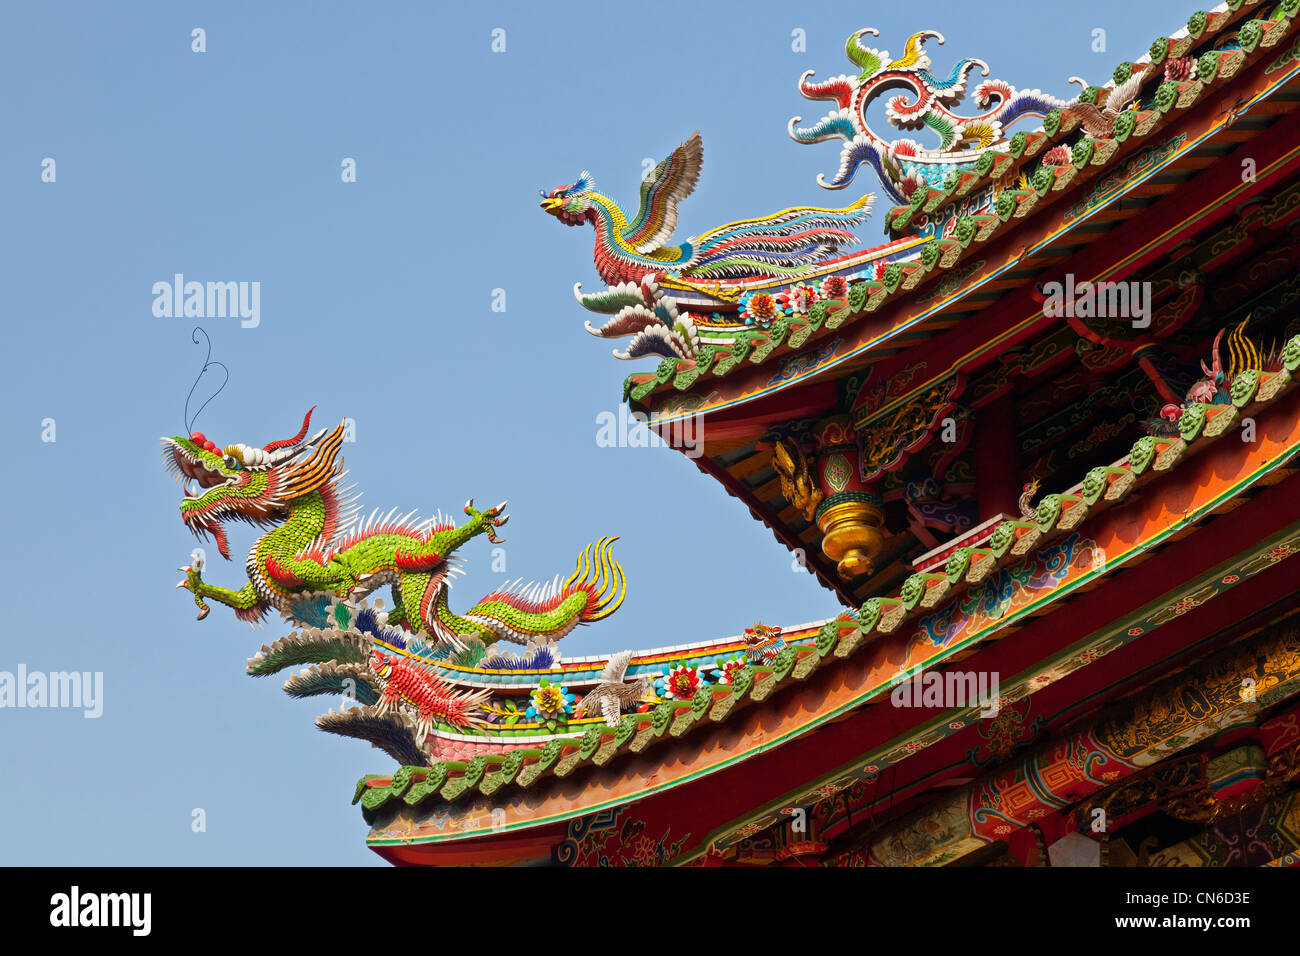 Roof detail at Longshan or Lungshan Temple Taipei Taiwan. JMH5696 Stock Photo